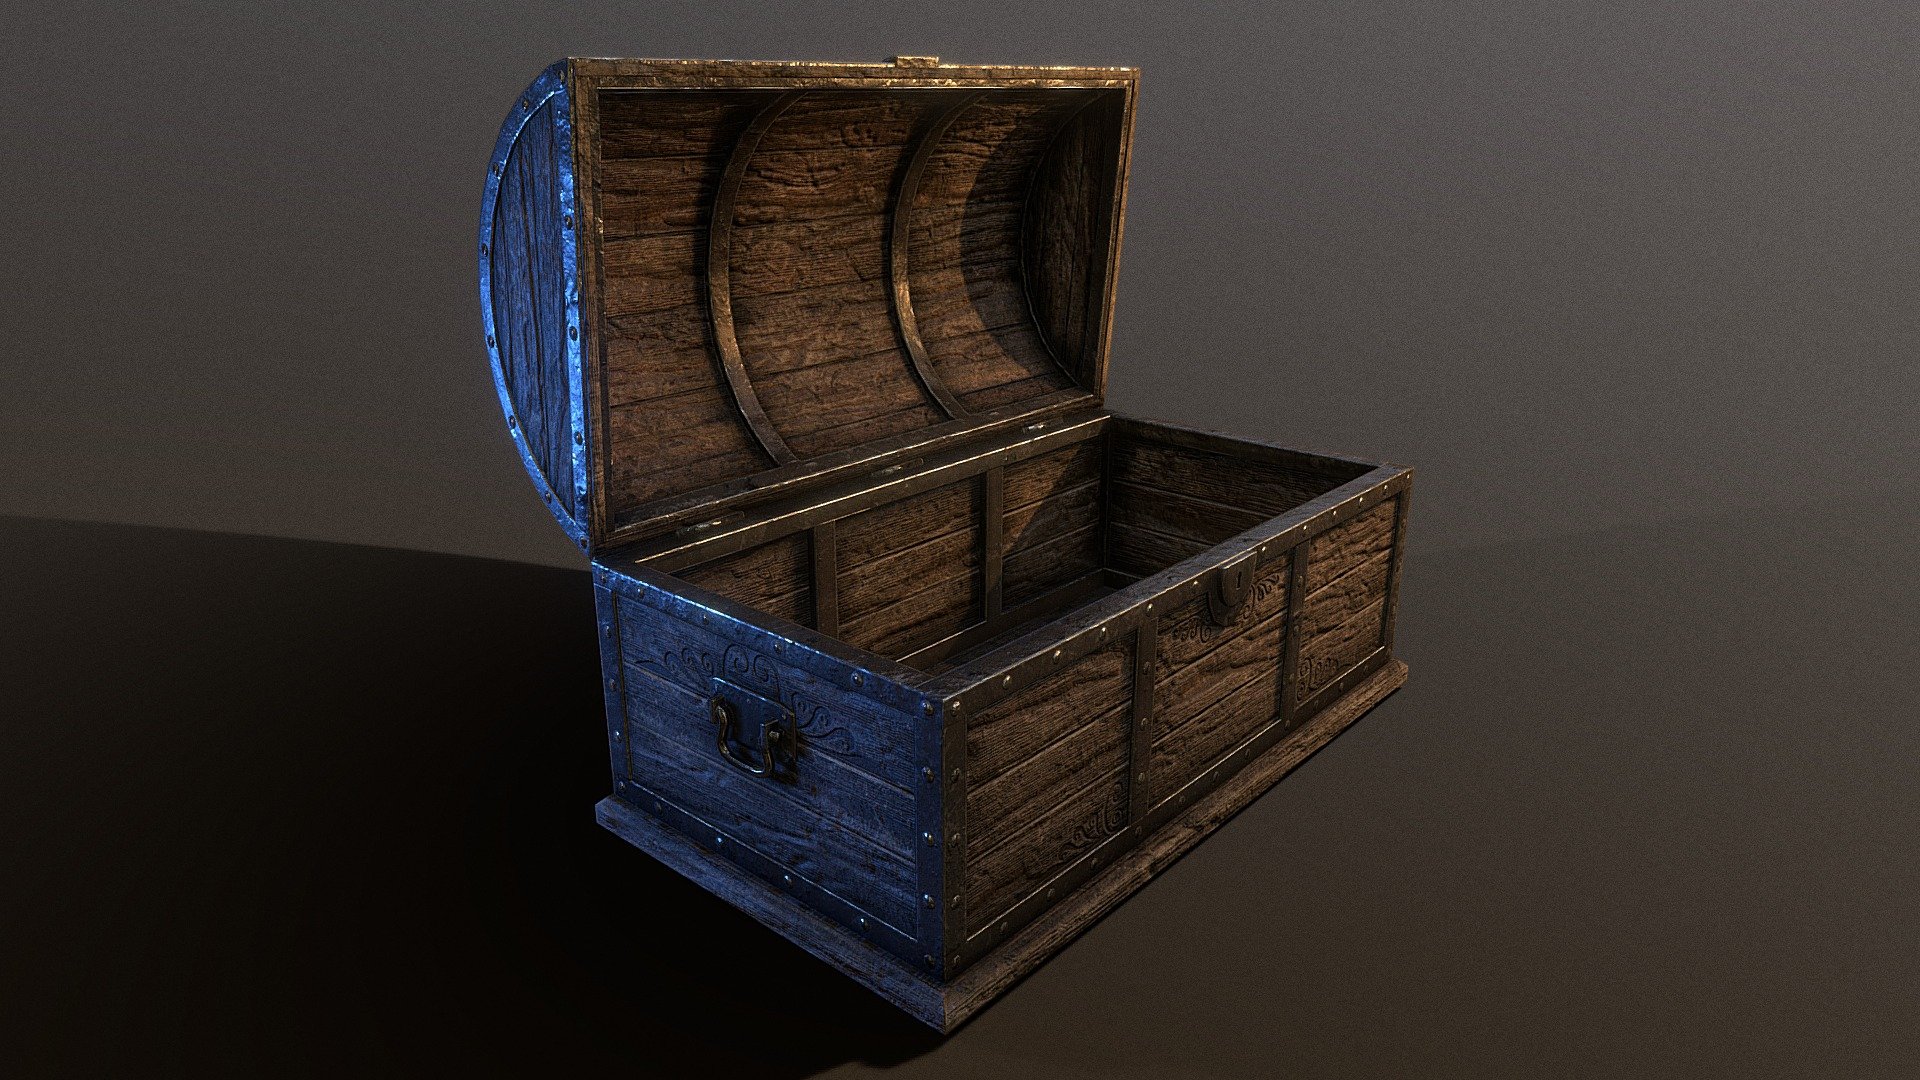 A low poly model ,wooden coffer or chest  for a medieval world.
Use it for your videogame or animations.

Click follow to see more about my works 3d model